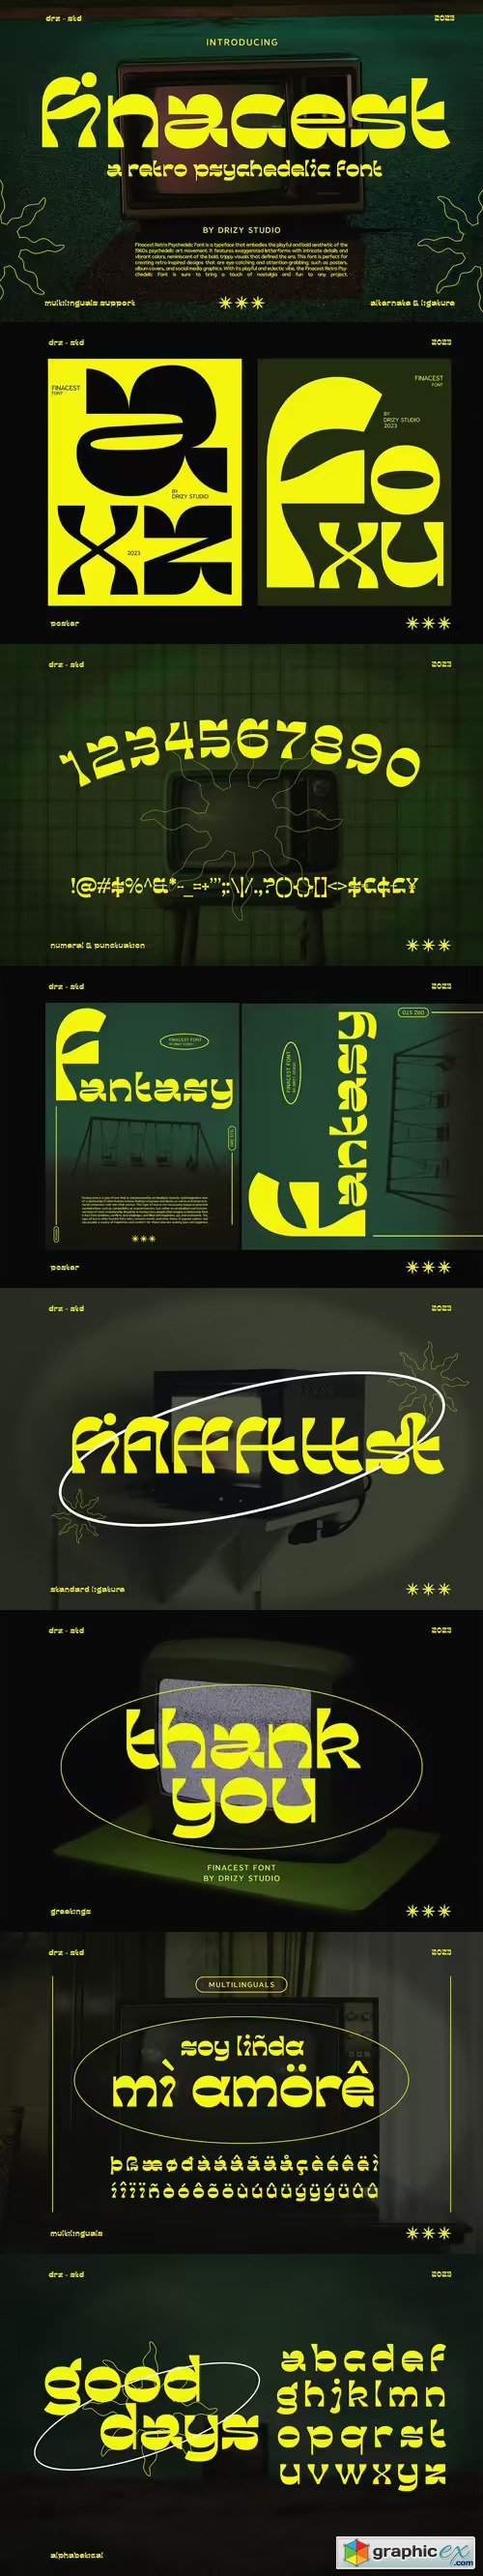 Finacest - Retro Psychedelic Font